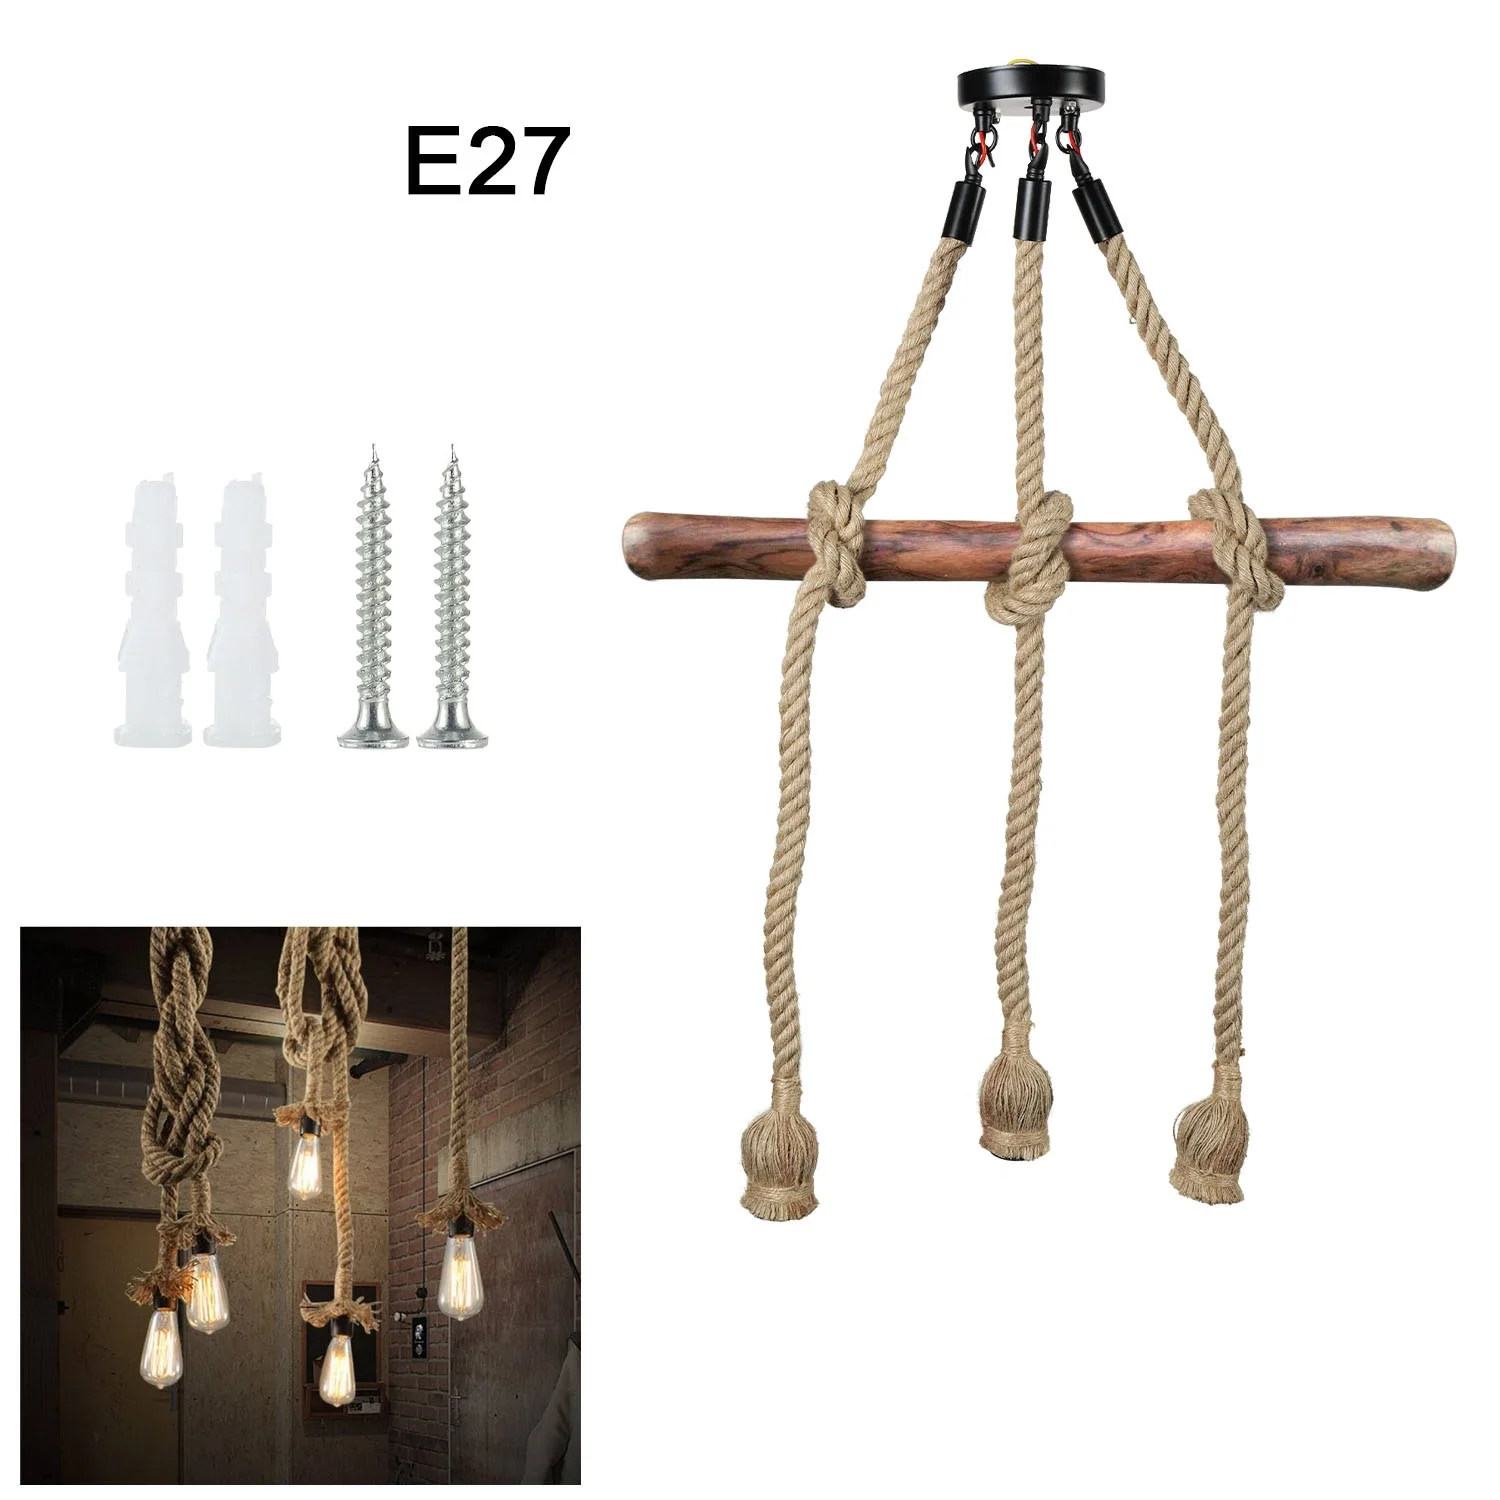 1M Industrial Chandeliers E27 3Head LED Retro Hemp Rope Ceiling Lamps Wi... - $24.93